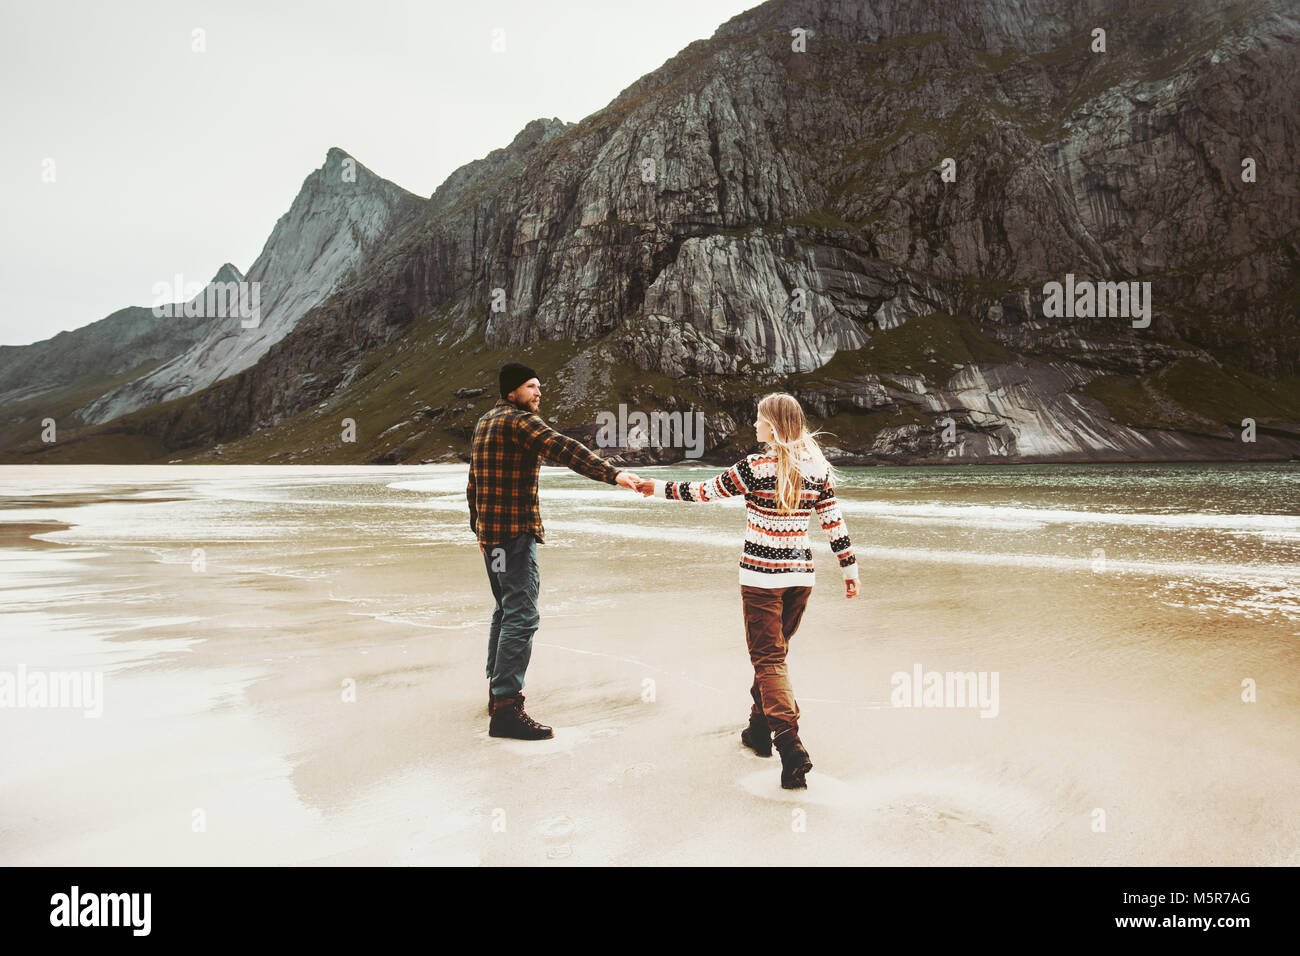 Couple walking together on beach holding hands Man and Woman together traveling Lifestyle concept romantic vacations at northern sea Stock Photo